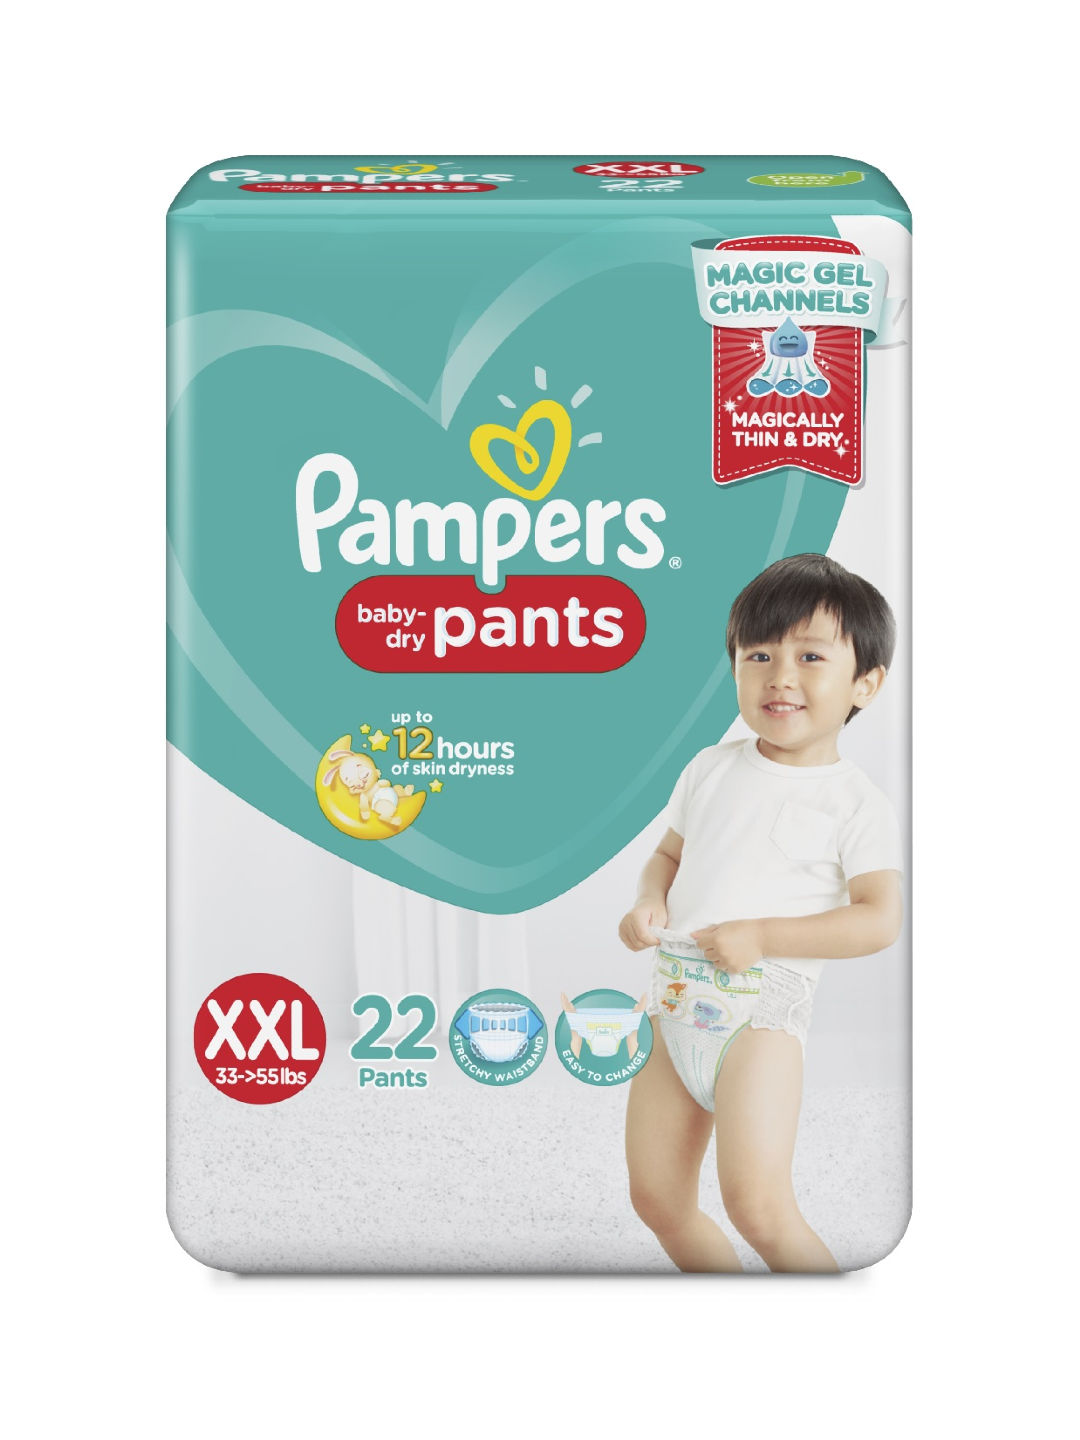 Pampers Baby Dry Pants XXL (15-28kg) 26 x 4 Packs - Case, Babies & Kids,  Bathing & Changing, Diapers & Baby Wipes on Carousell